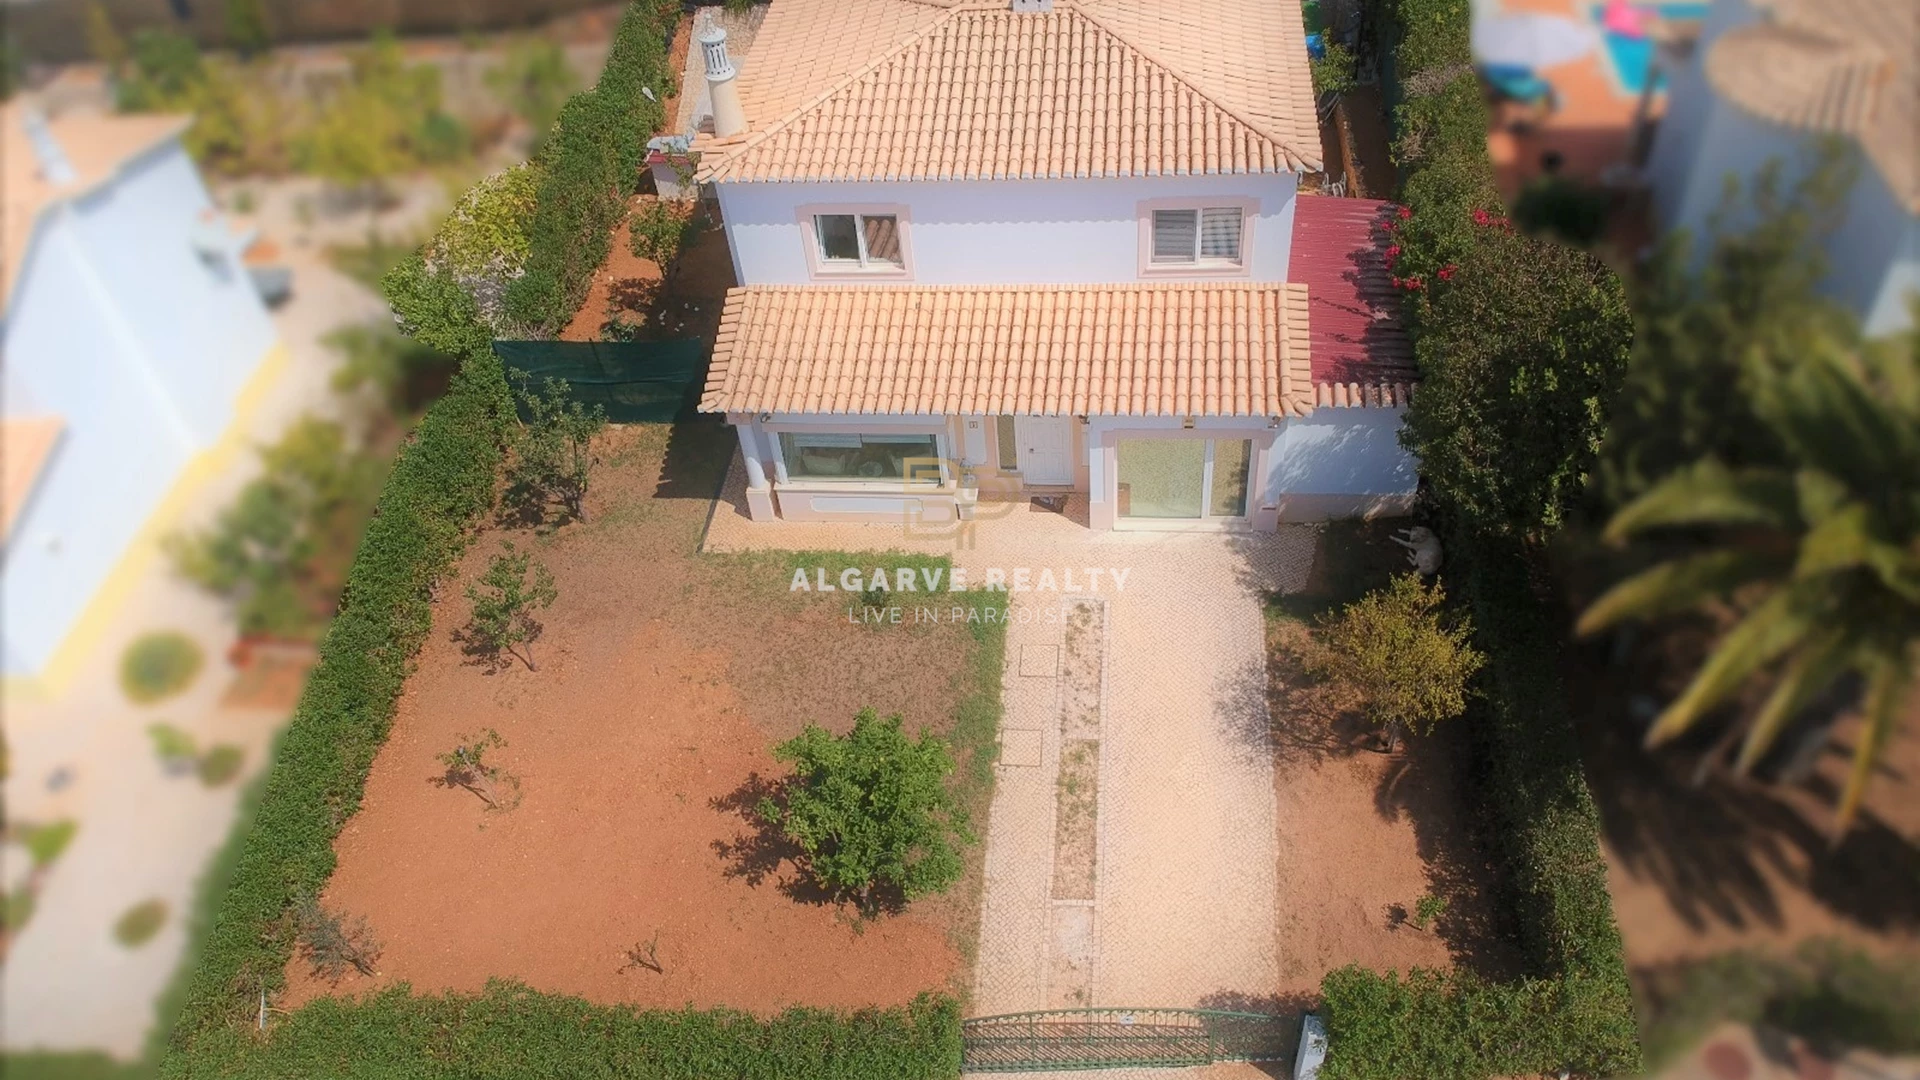 Portimão - SALE - 4 BEDROOM DETACHED HOUSE - OPPORTUNITY